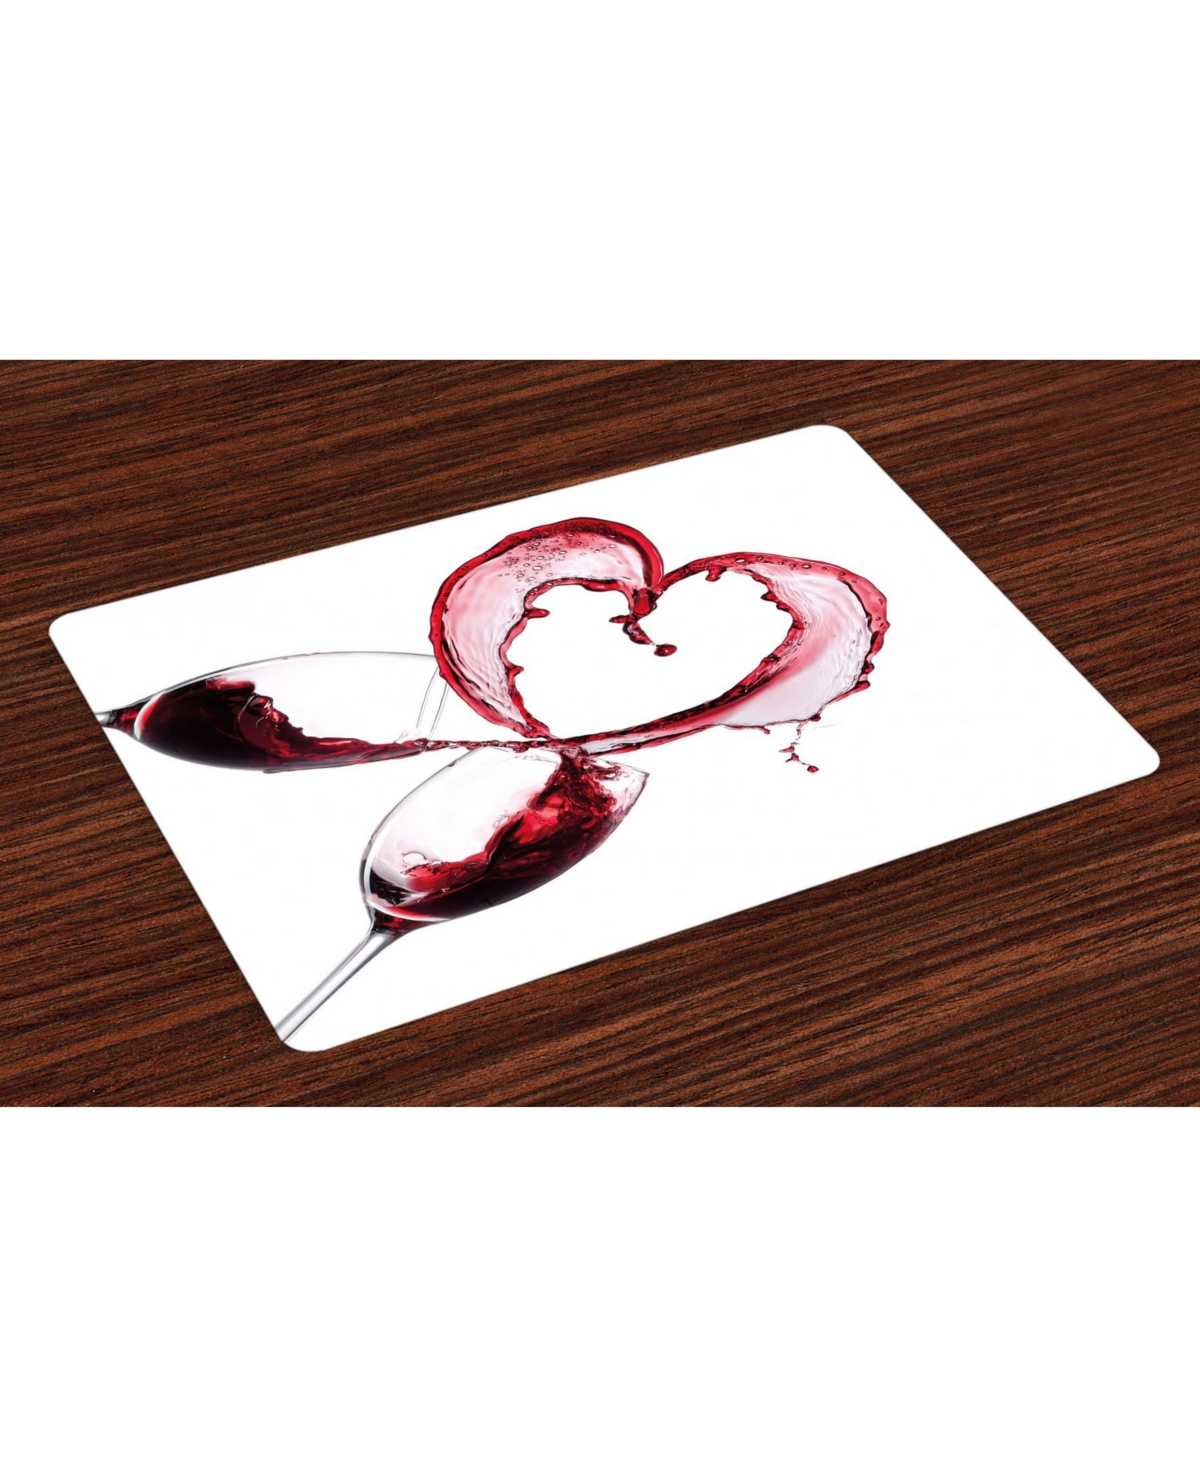 AMBESONNE WINE PLACE MATS, SET OF 4